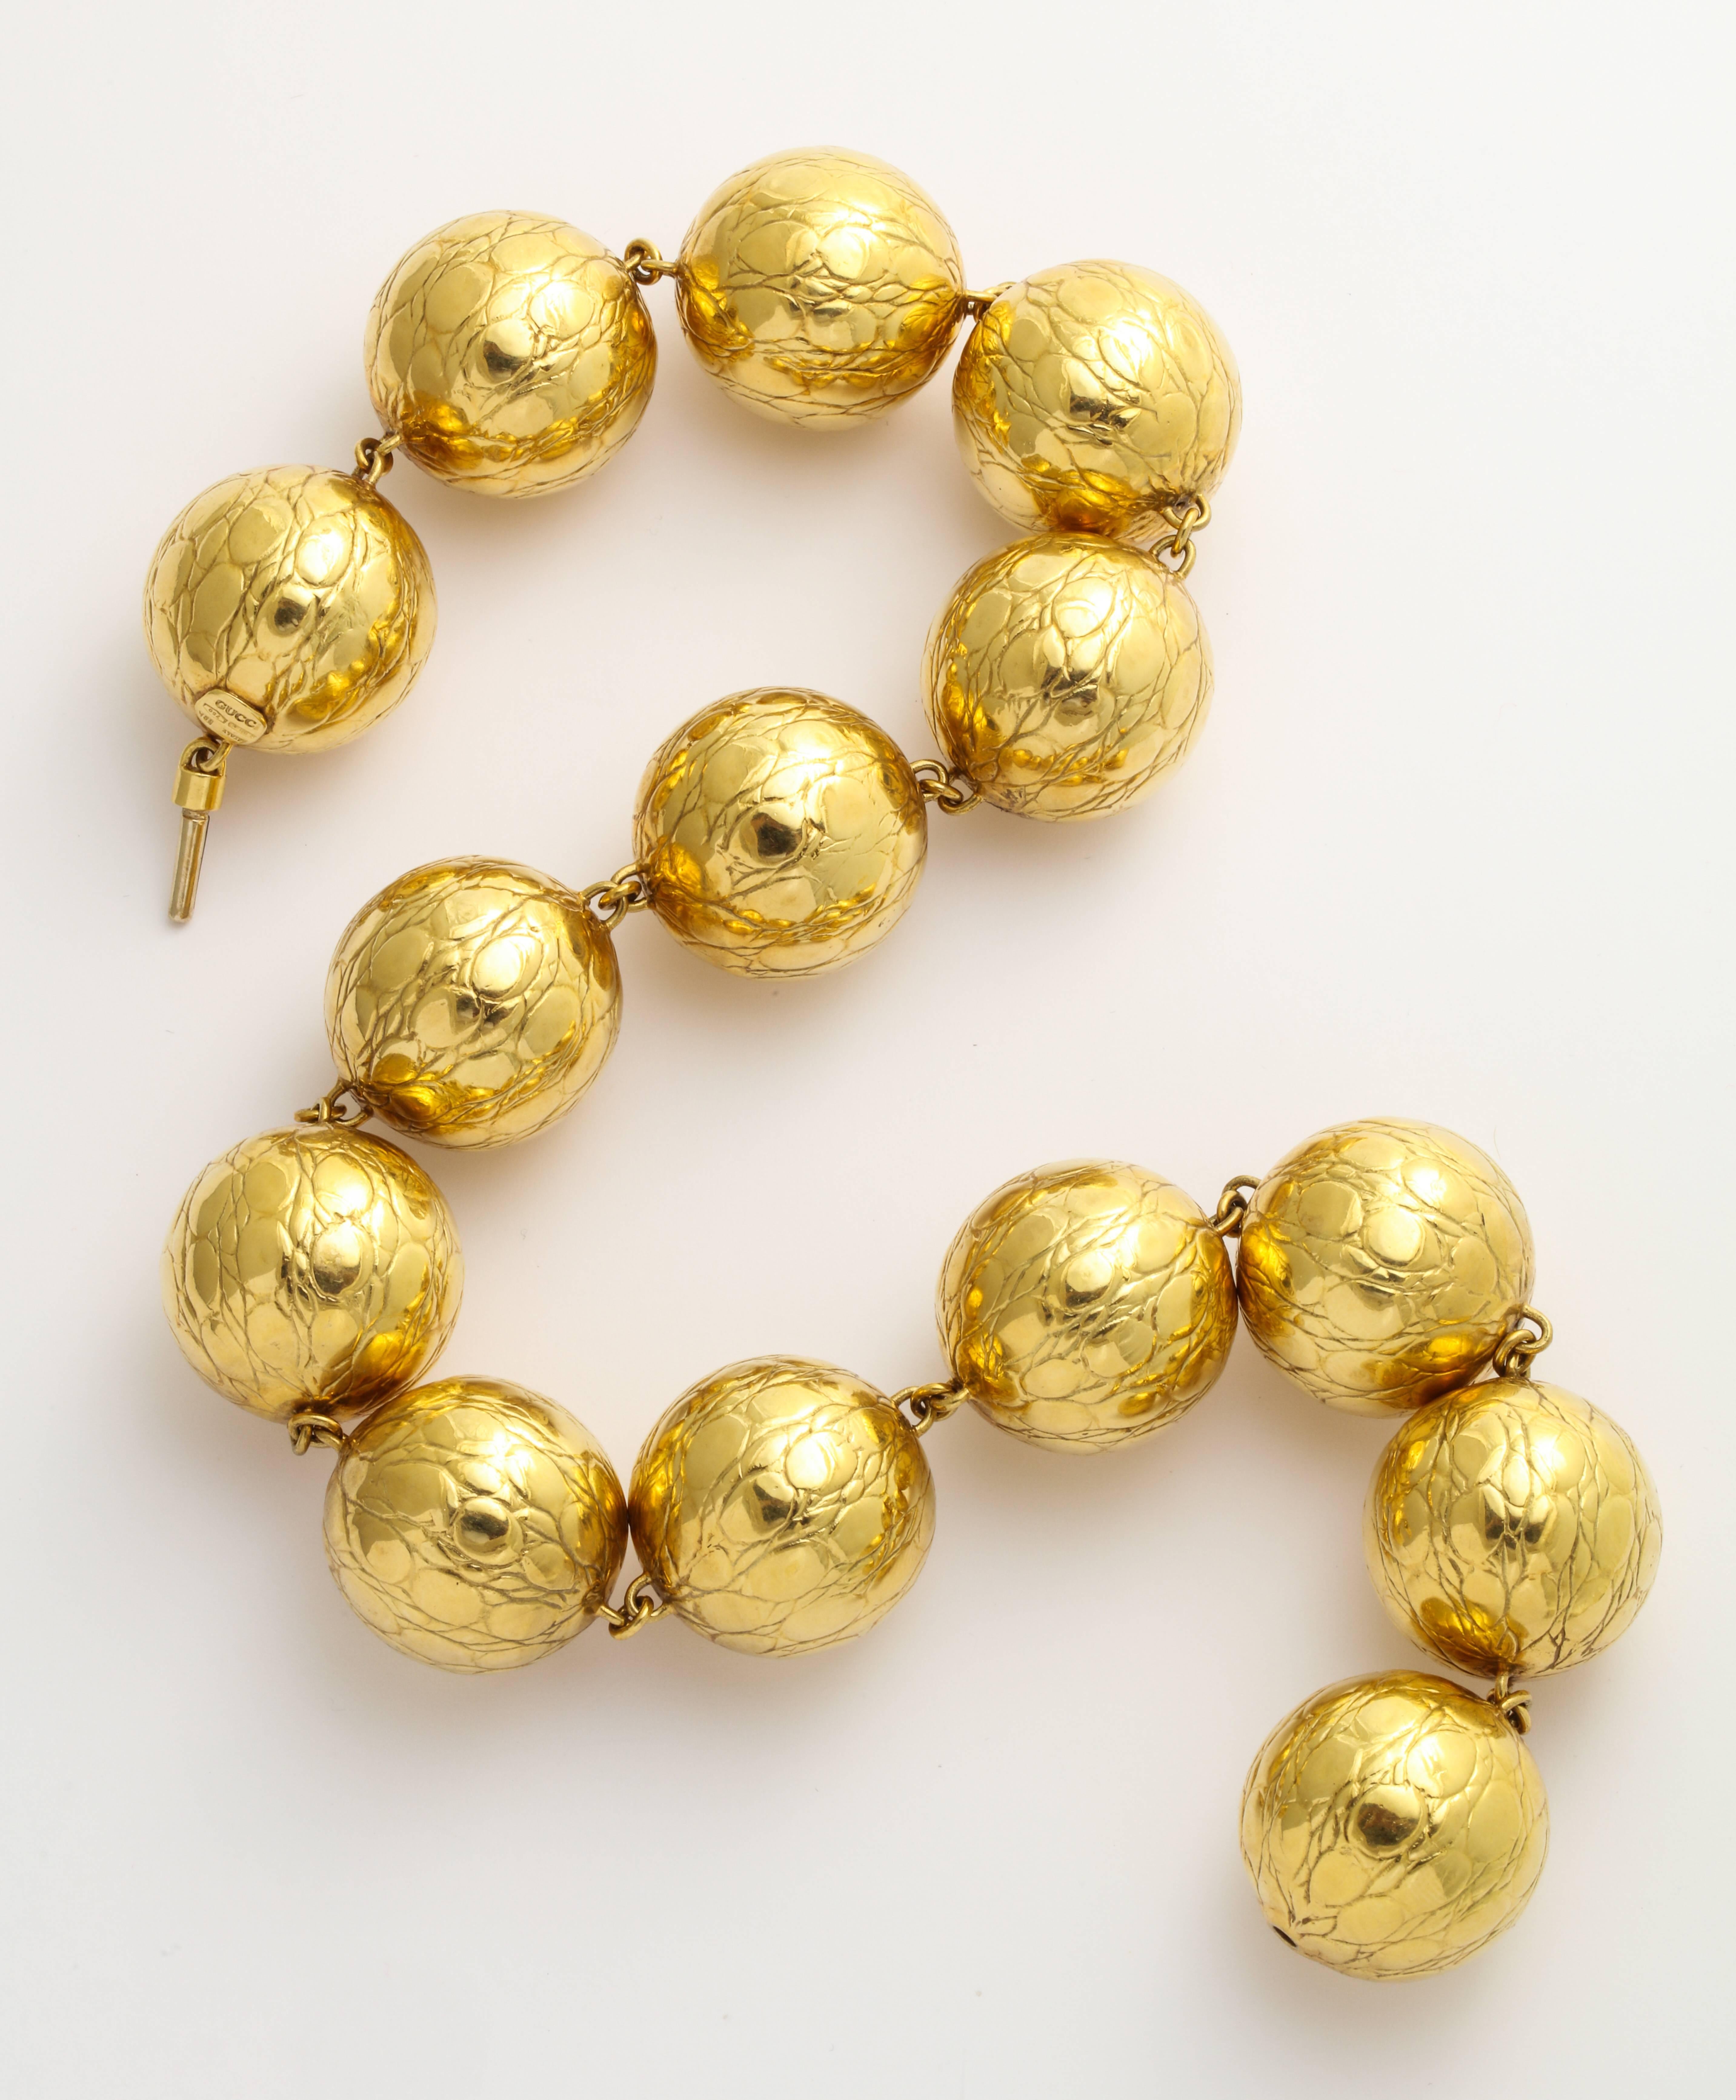 A bold and stunning Gucci necklace of linked 1 inch 18K gold balls with a recessed alligator finish. 18 inches long. Gold mark, Gucci mark, and Italy. 127.7 grams.